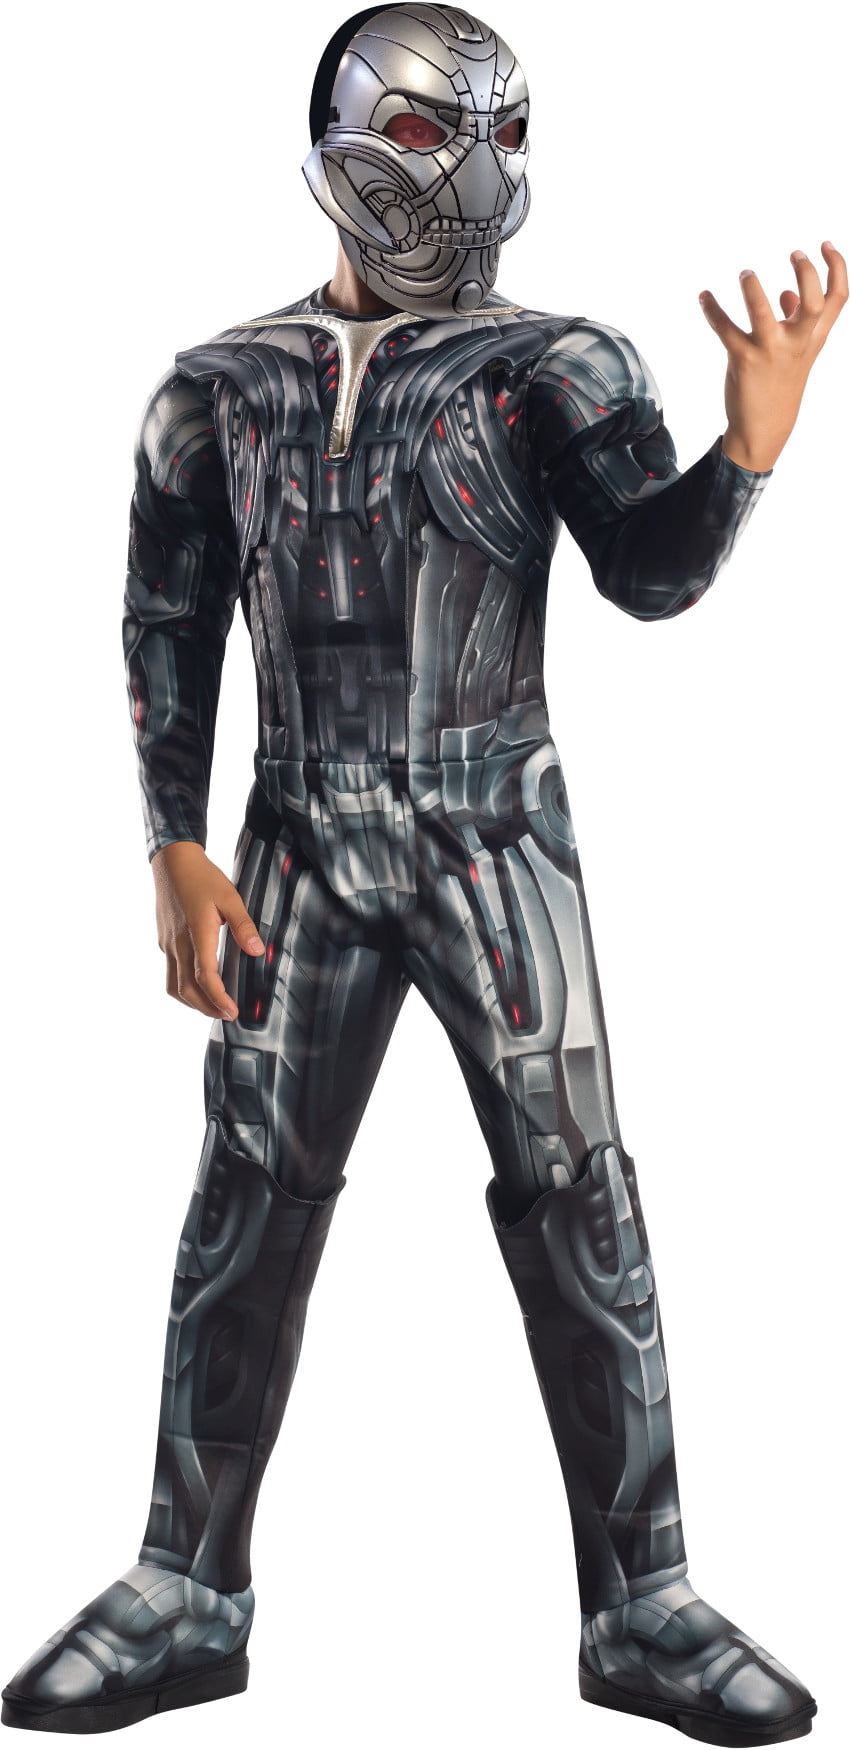 Age of Ultron Deluxe Ultron Child Costume Avengers 2 